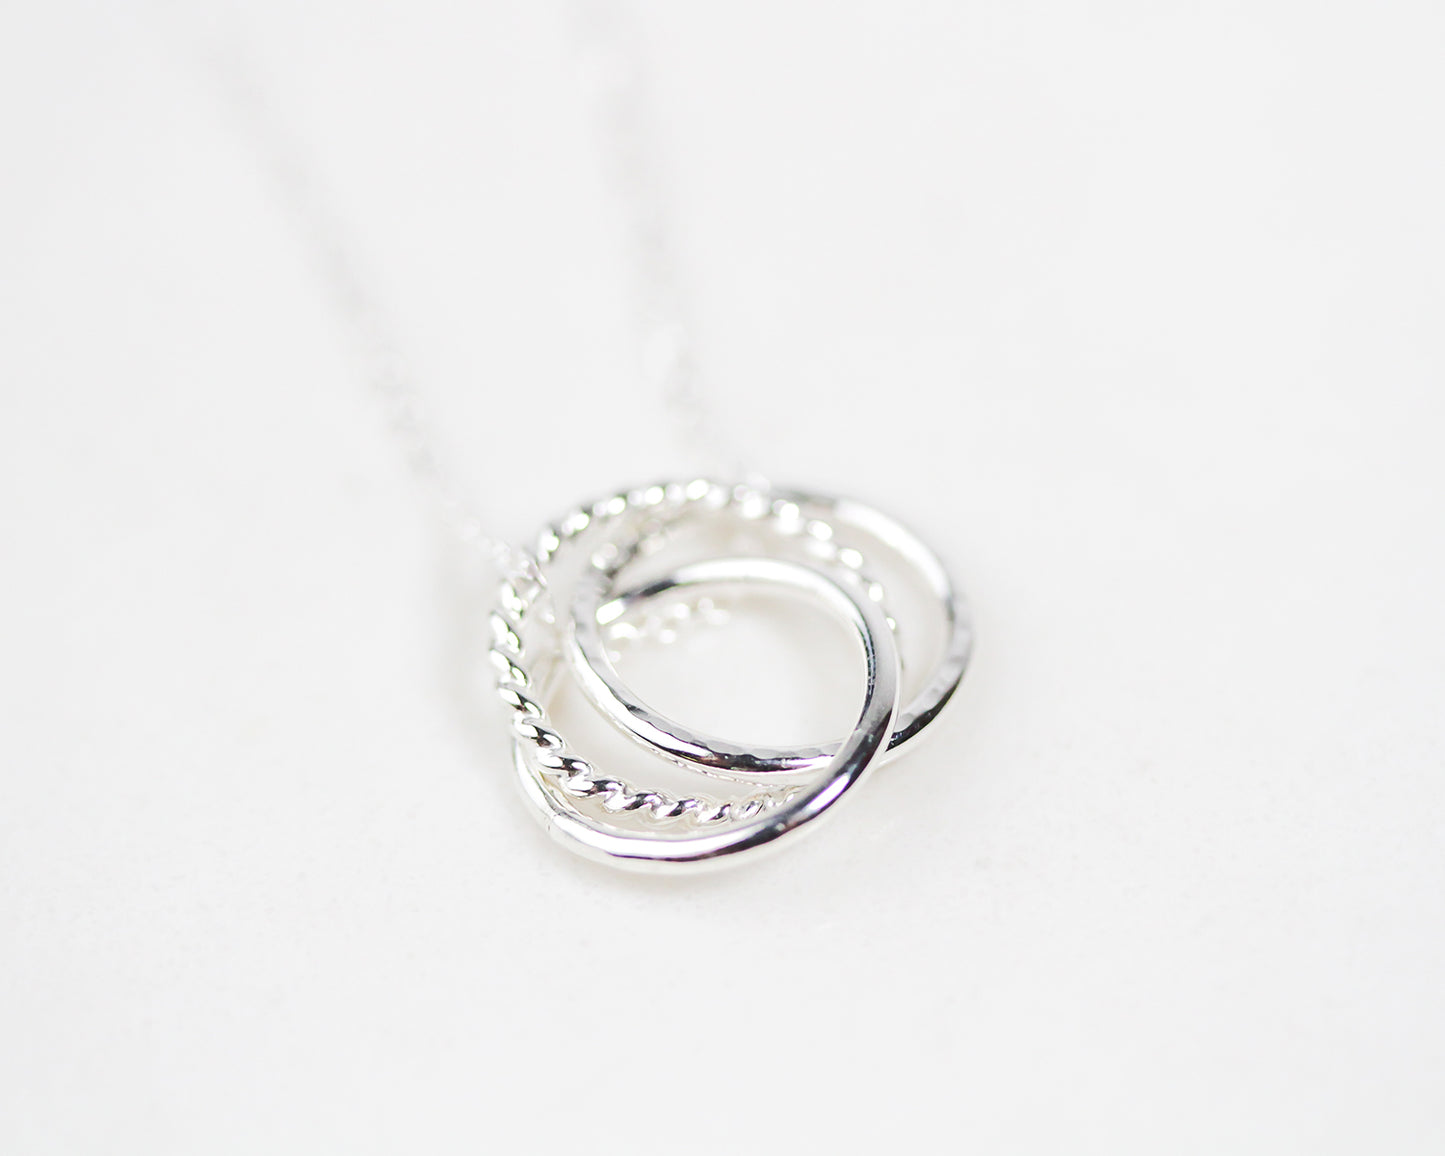 The Togetherness Necklace